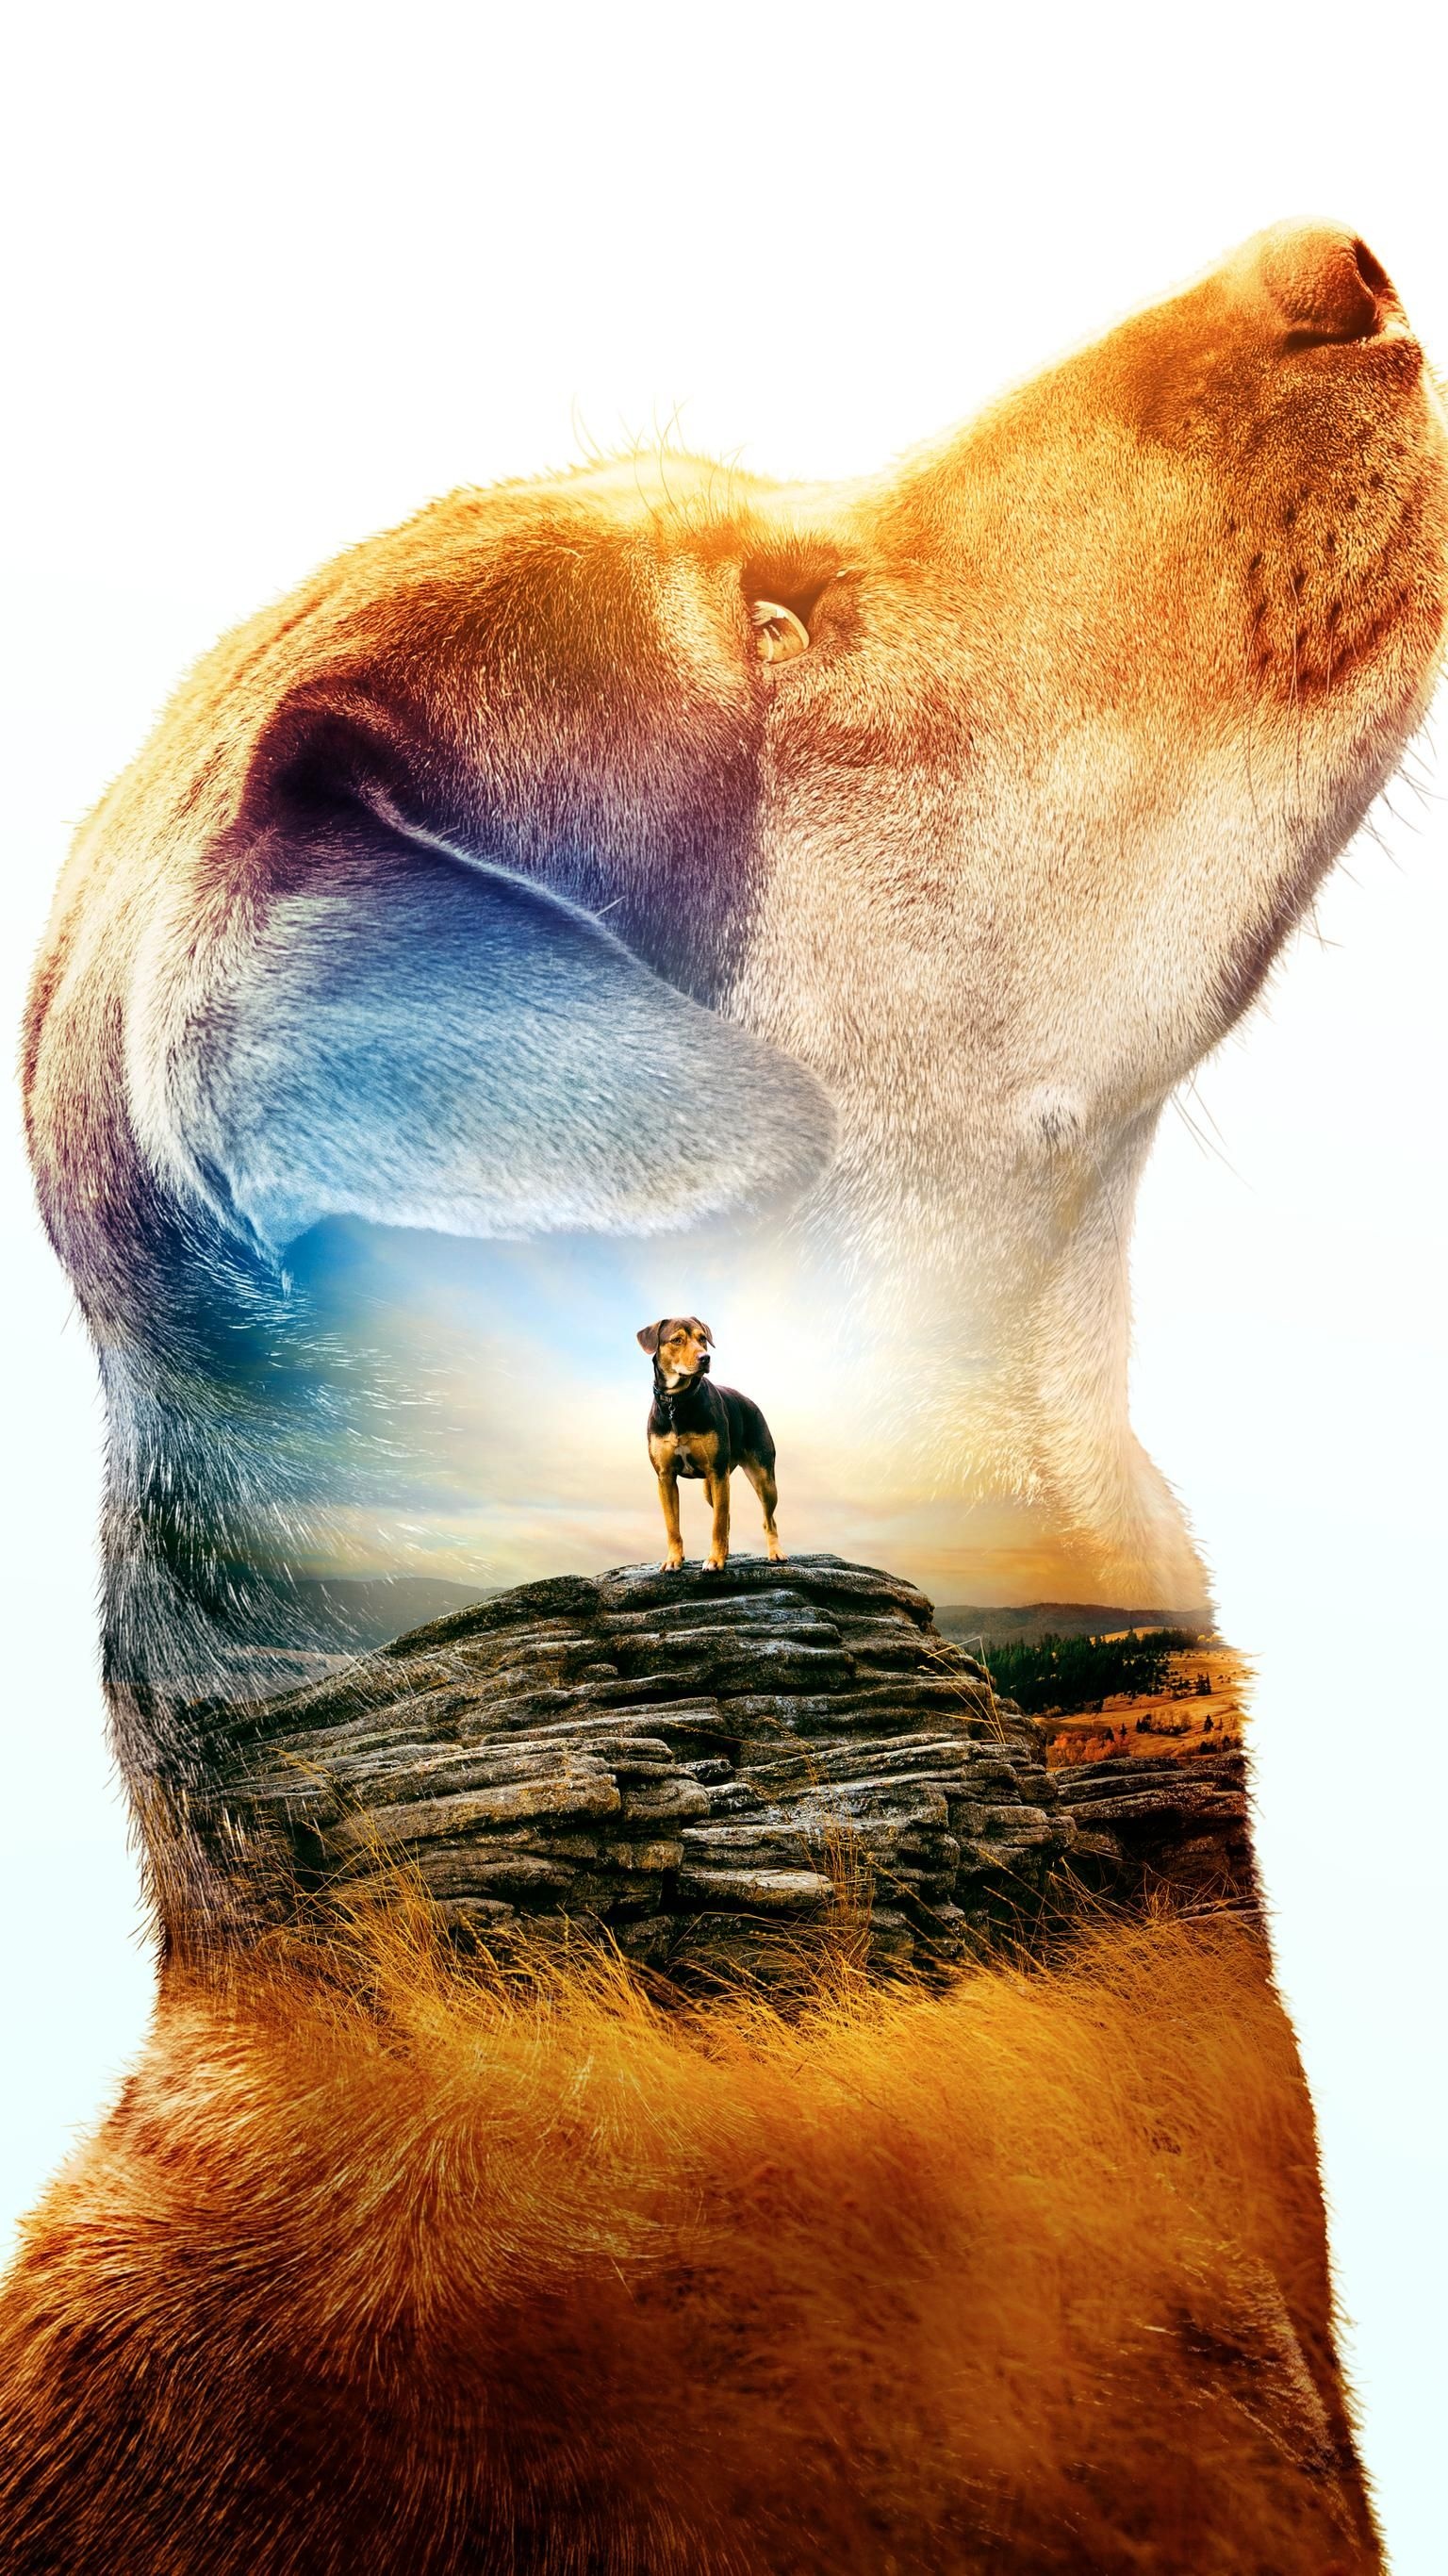 Animal movie recommendations, Heartwarming family films, Movie inspiration, Feel-good stories, 1540x2740 HD Handy